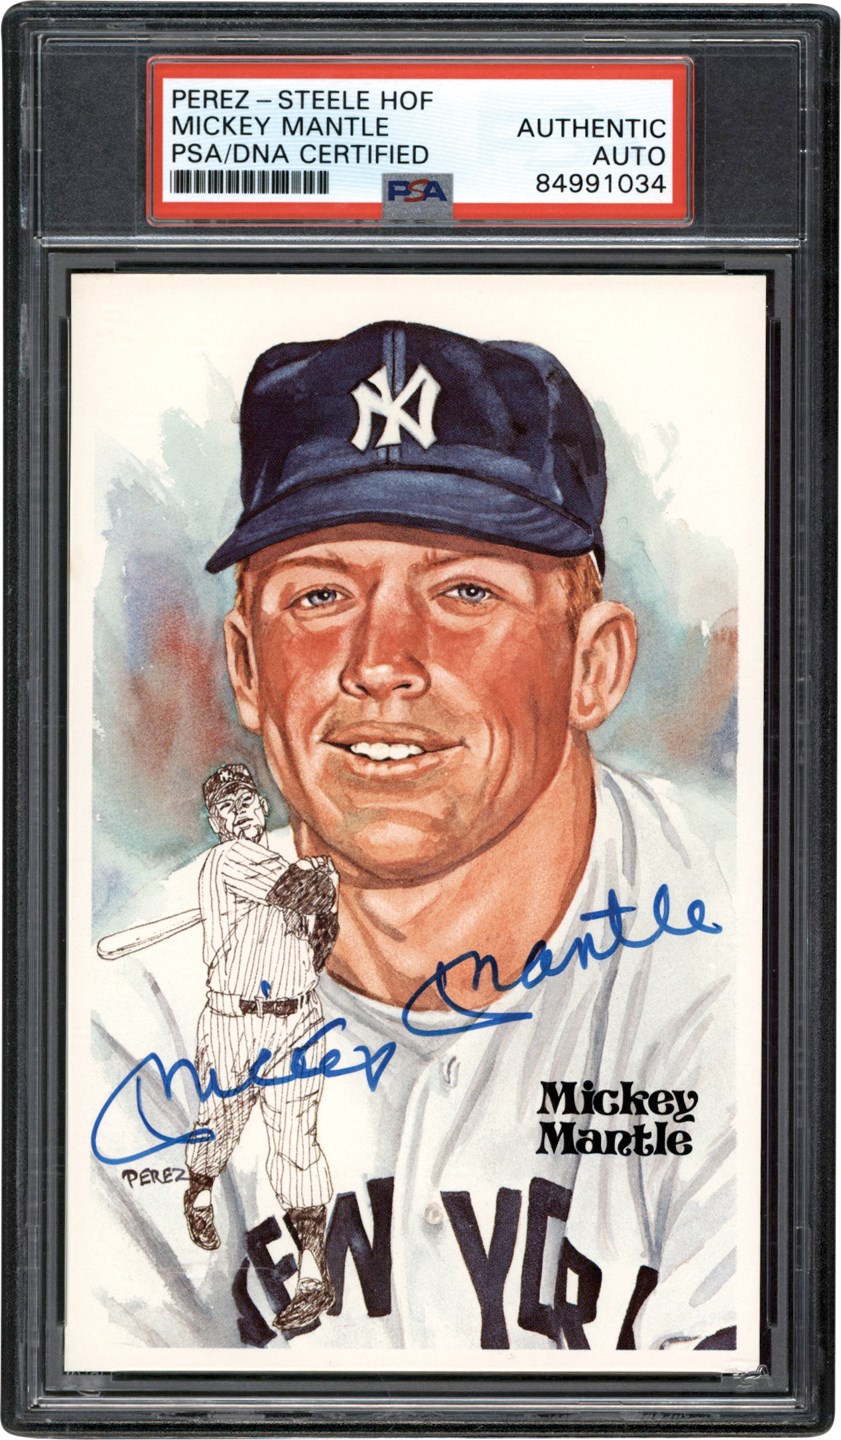 - Mickey Mantle Signed Perez Steele Hall of Fame Postcard (PSA)